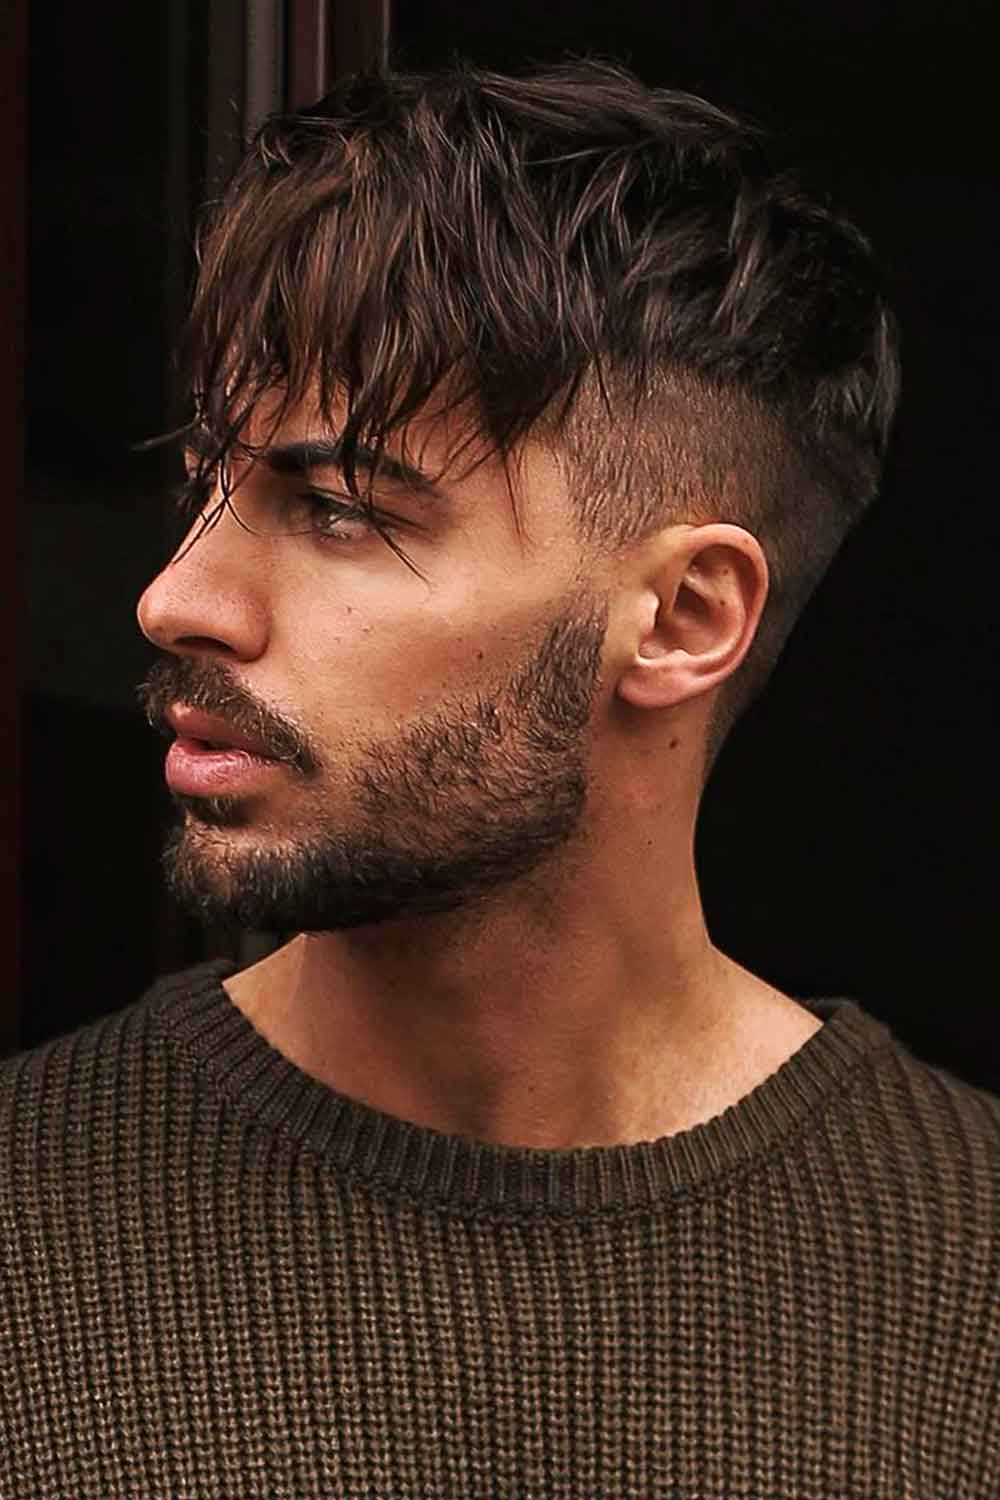 Haircut Names For Men: Types of Haircuts (The Complete Guide)